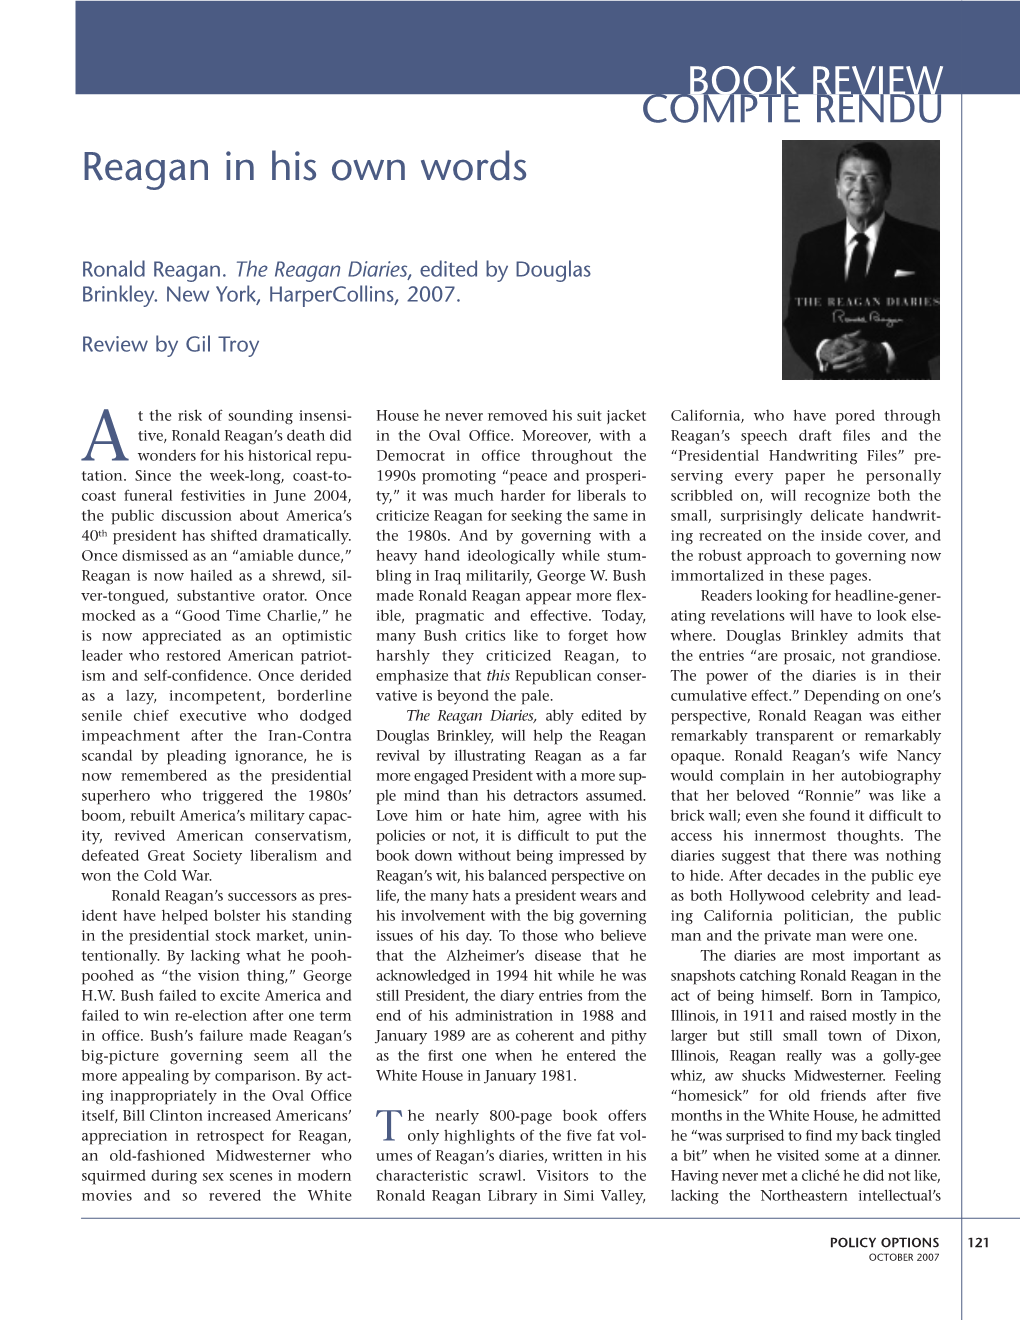 BOOK REVIEW COMPTE RENDU Reagan in His Own Words